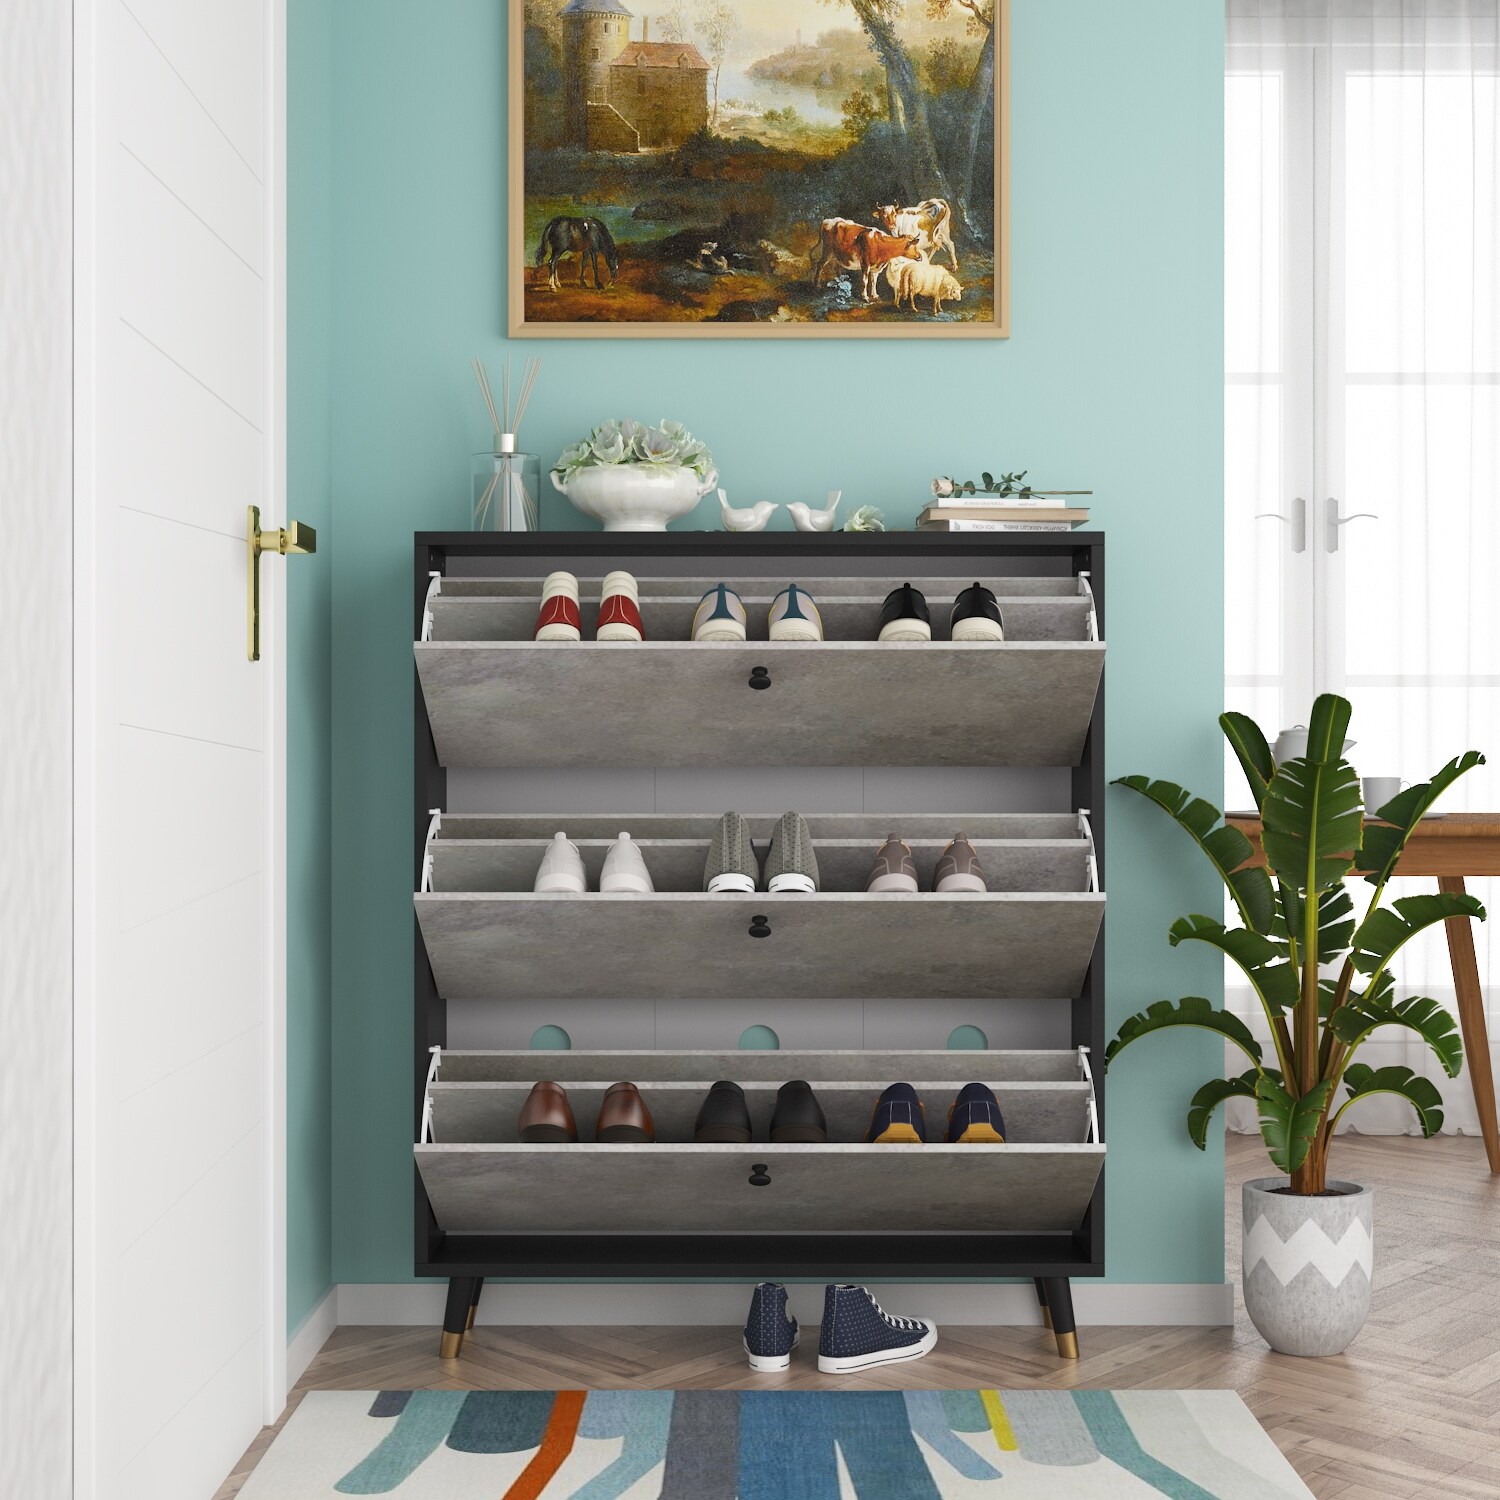 https://ak1.ostkcdn.com/images/products/is/images/direct/e9b9ece2b1e5e12eebd692a5d40d96556c98ed79/Modern-Shoe-Storage-Cabinet-Dressers-Bedroom-Chests-Cement-Gray-Drawer.jpg